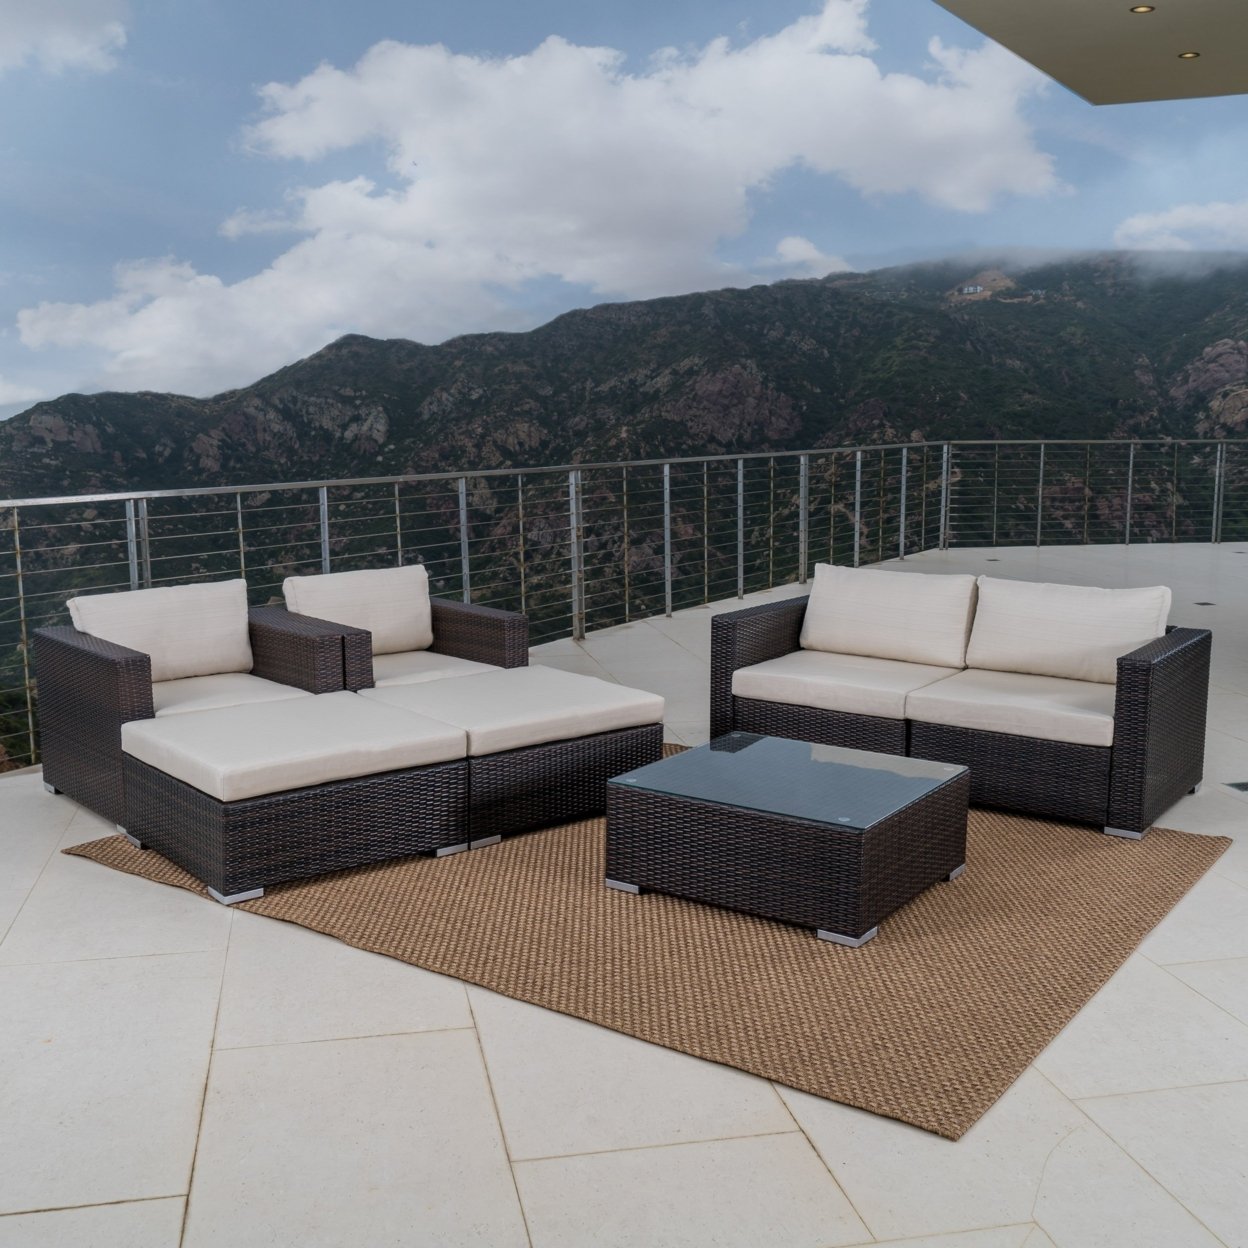 Francisco Outdoor Wicker Sectional With Cushions - Multibrown/Beige, 7 Piece Set